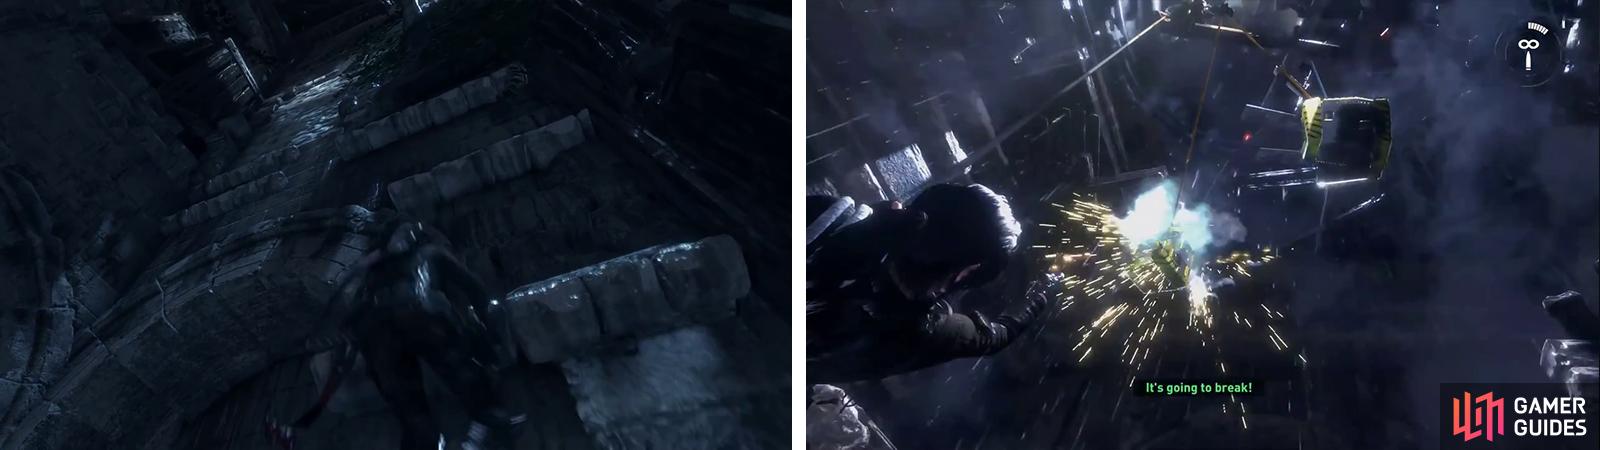 Climb to the top of the cathedral's interior (left). During the cut-scene, shoot the generators (right) to continue.